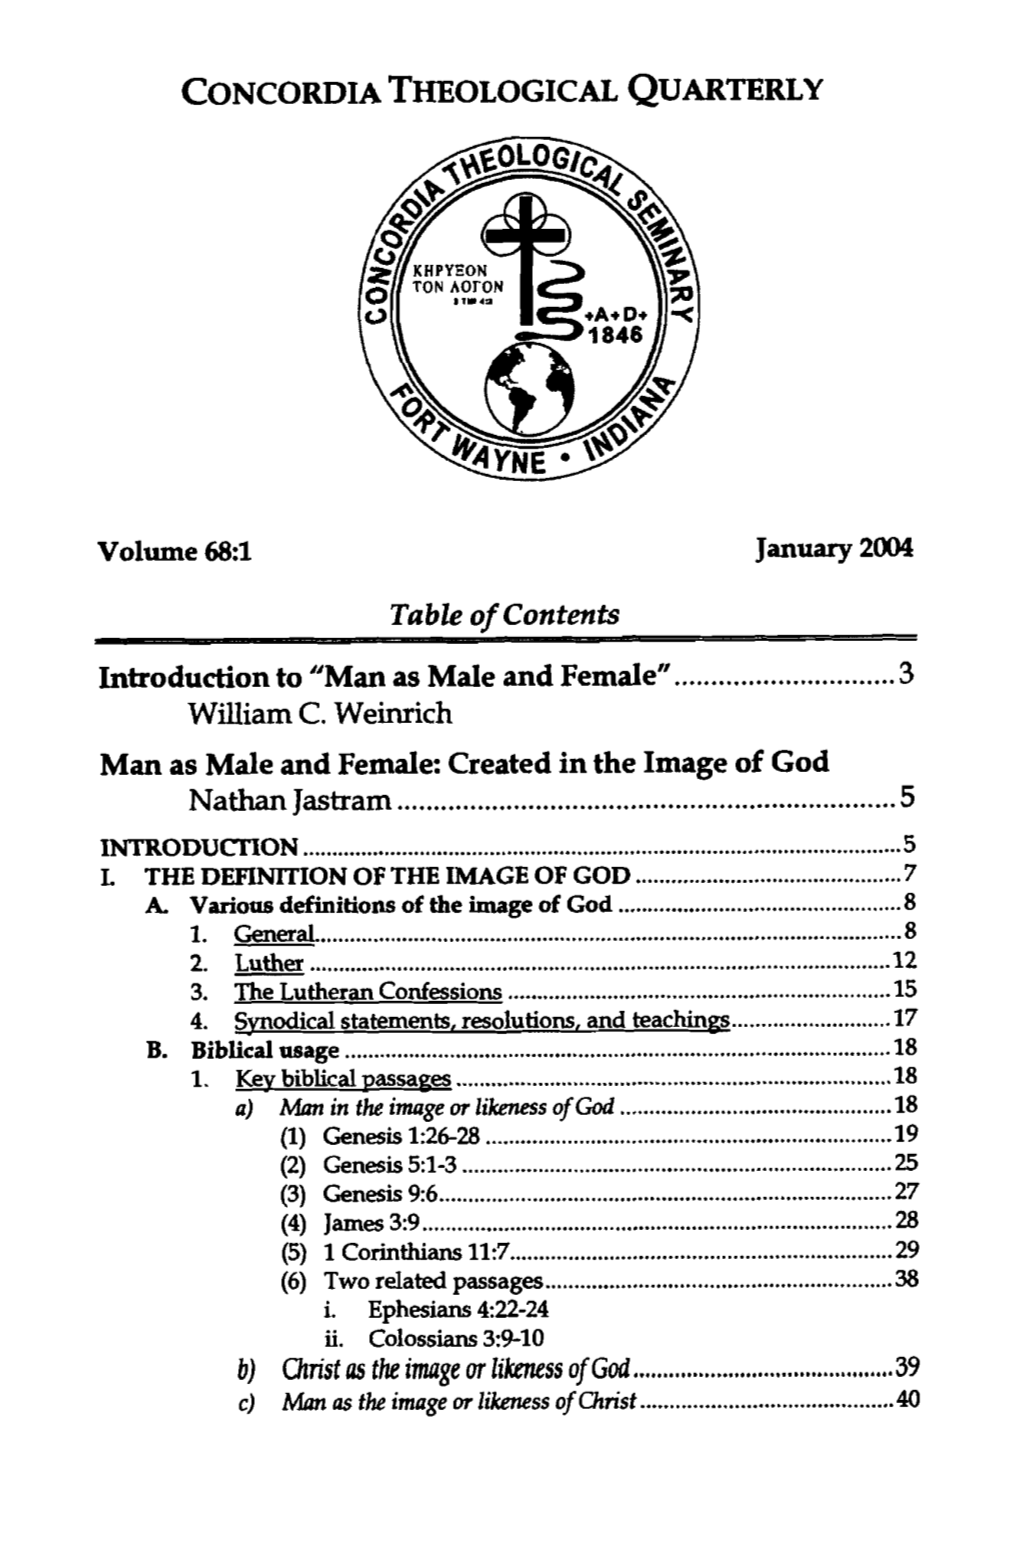 Man As Male and Female: Created in the Image of God Nathan Jastram